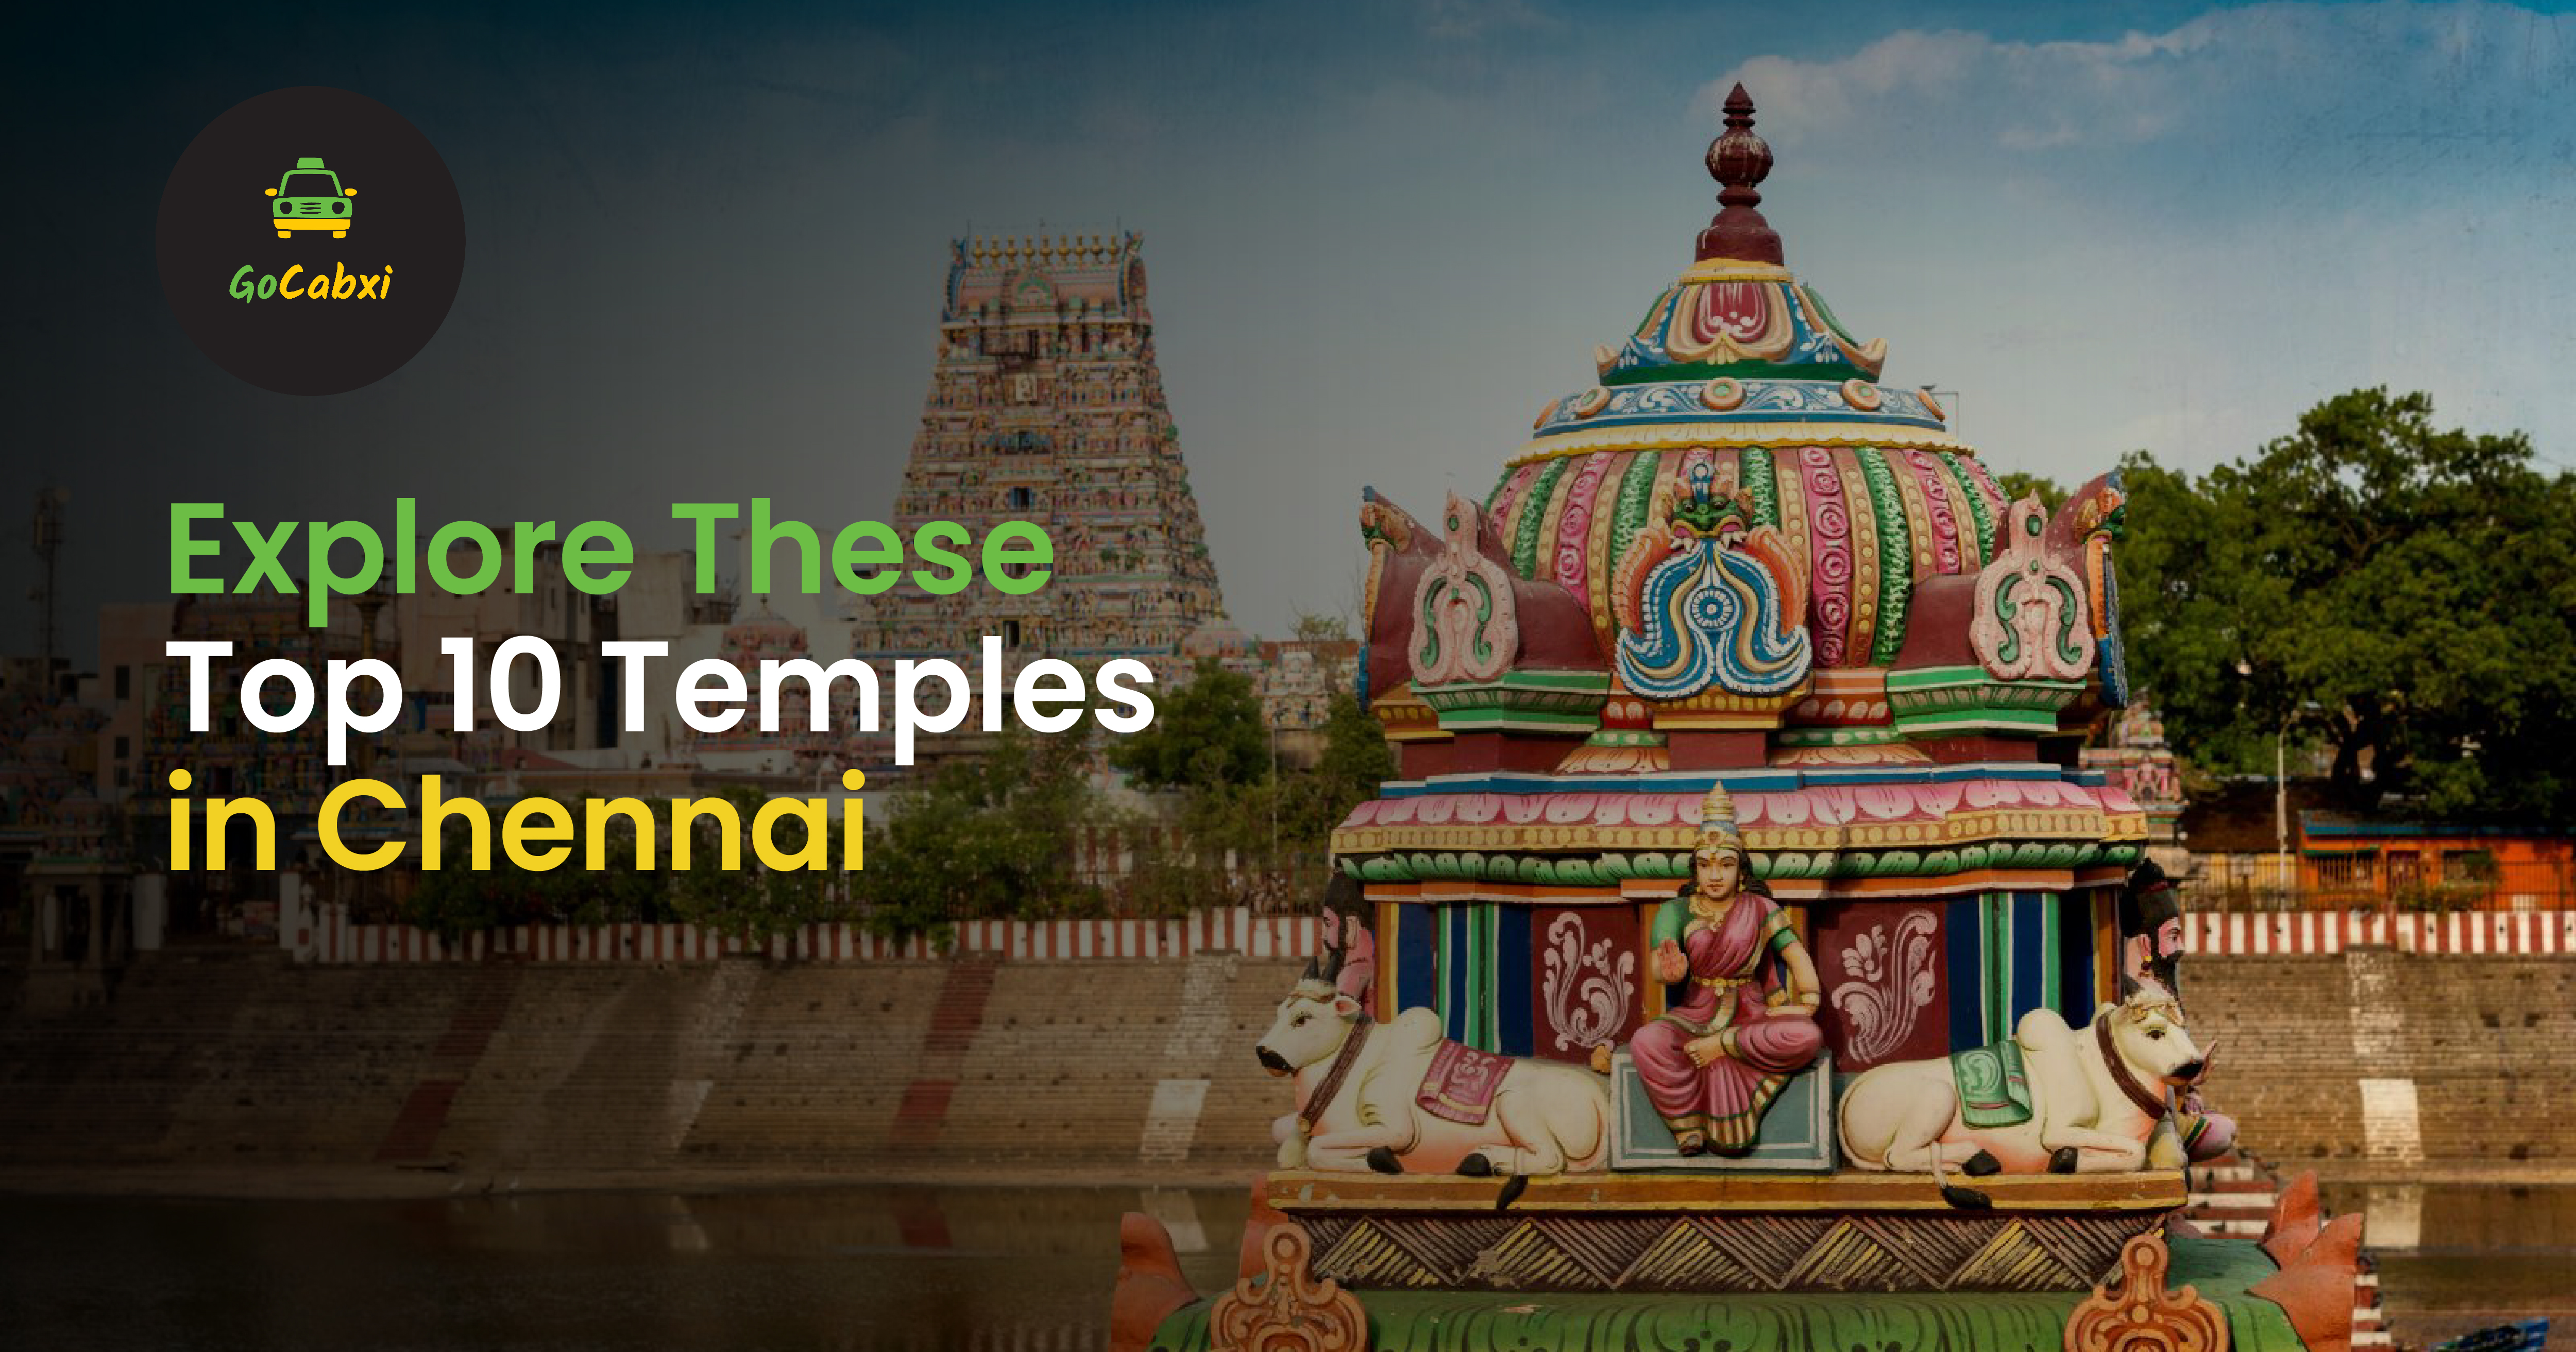 Explore These Top 10 Temples in Chennai | Gocabxi